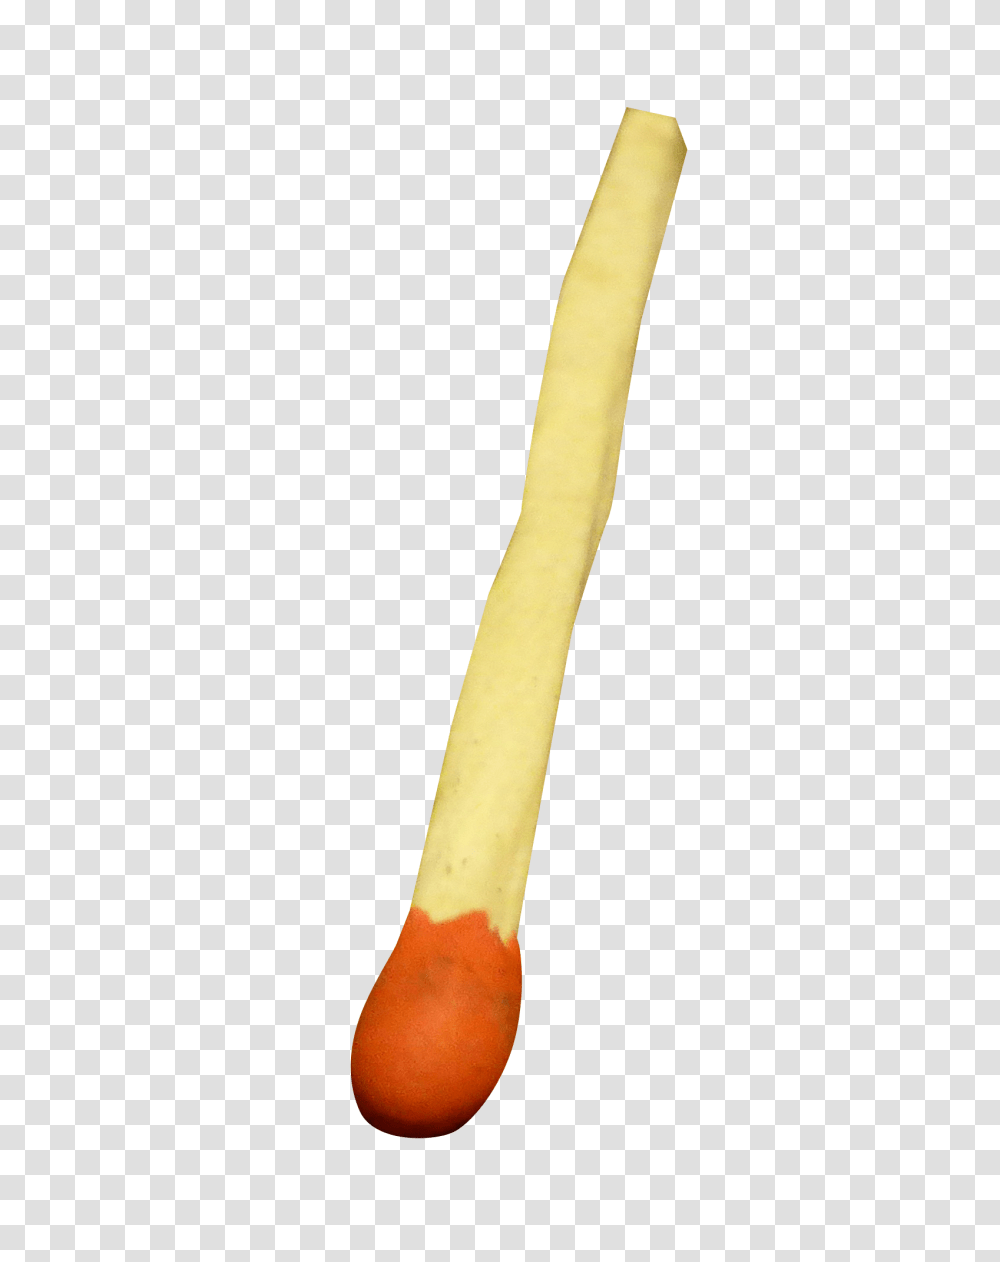 Matchstick Image, Tool, Oars Transparent Png